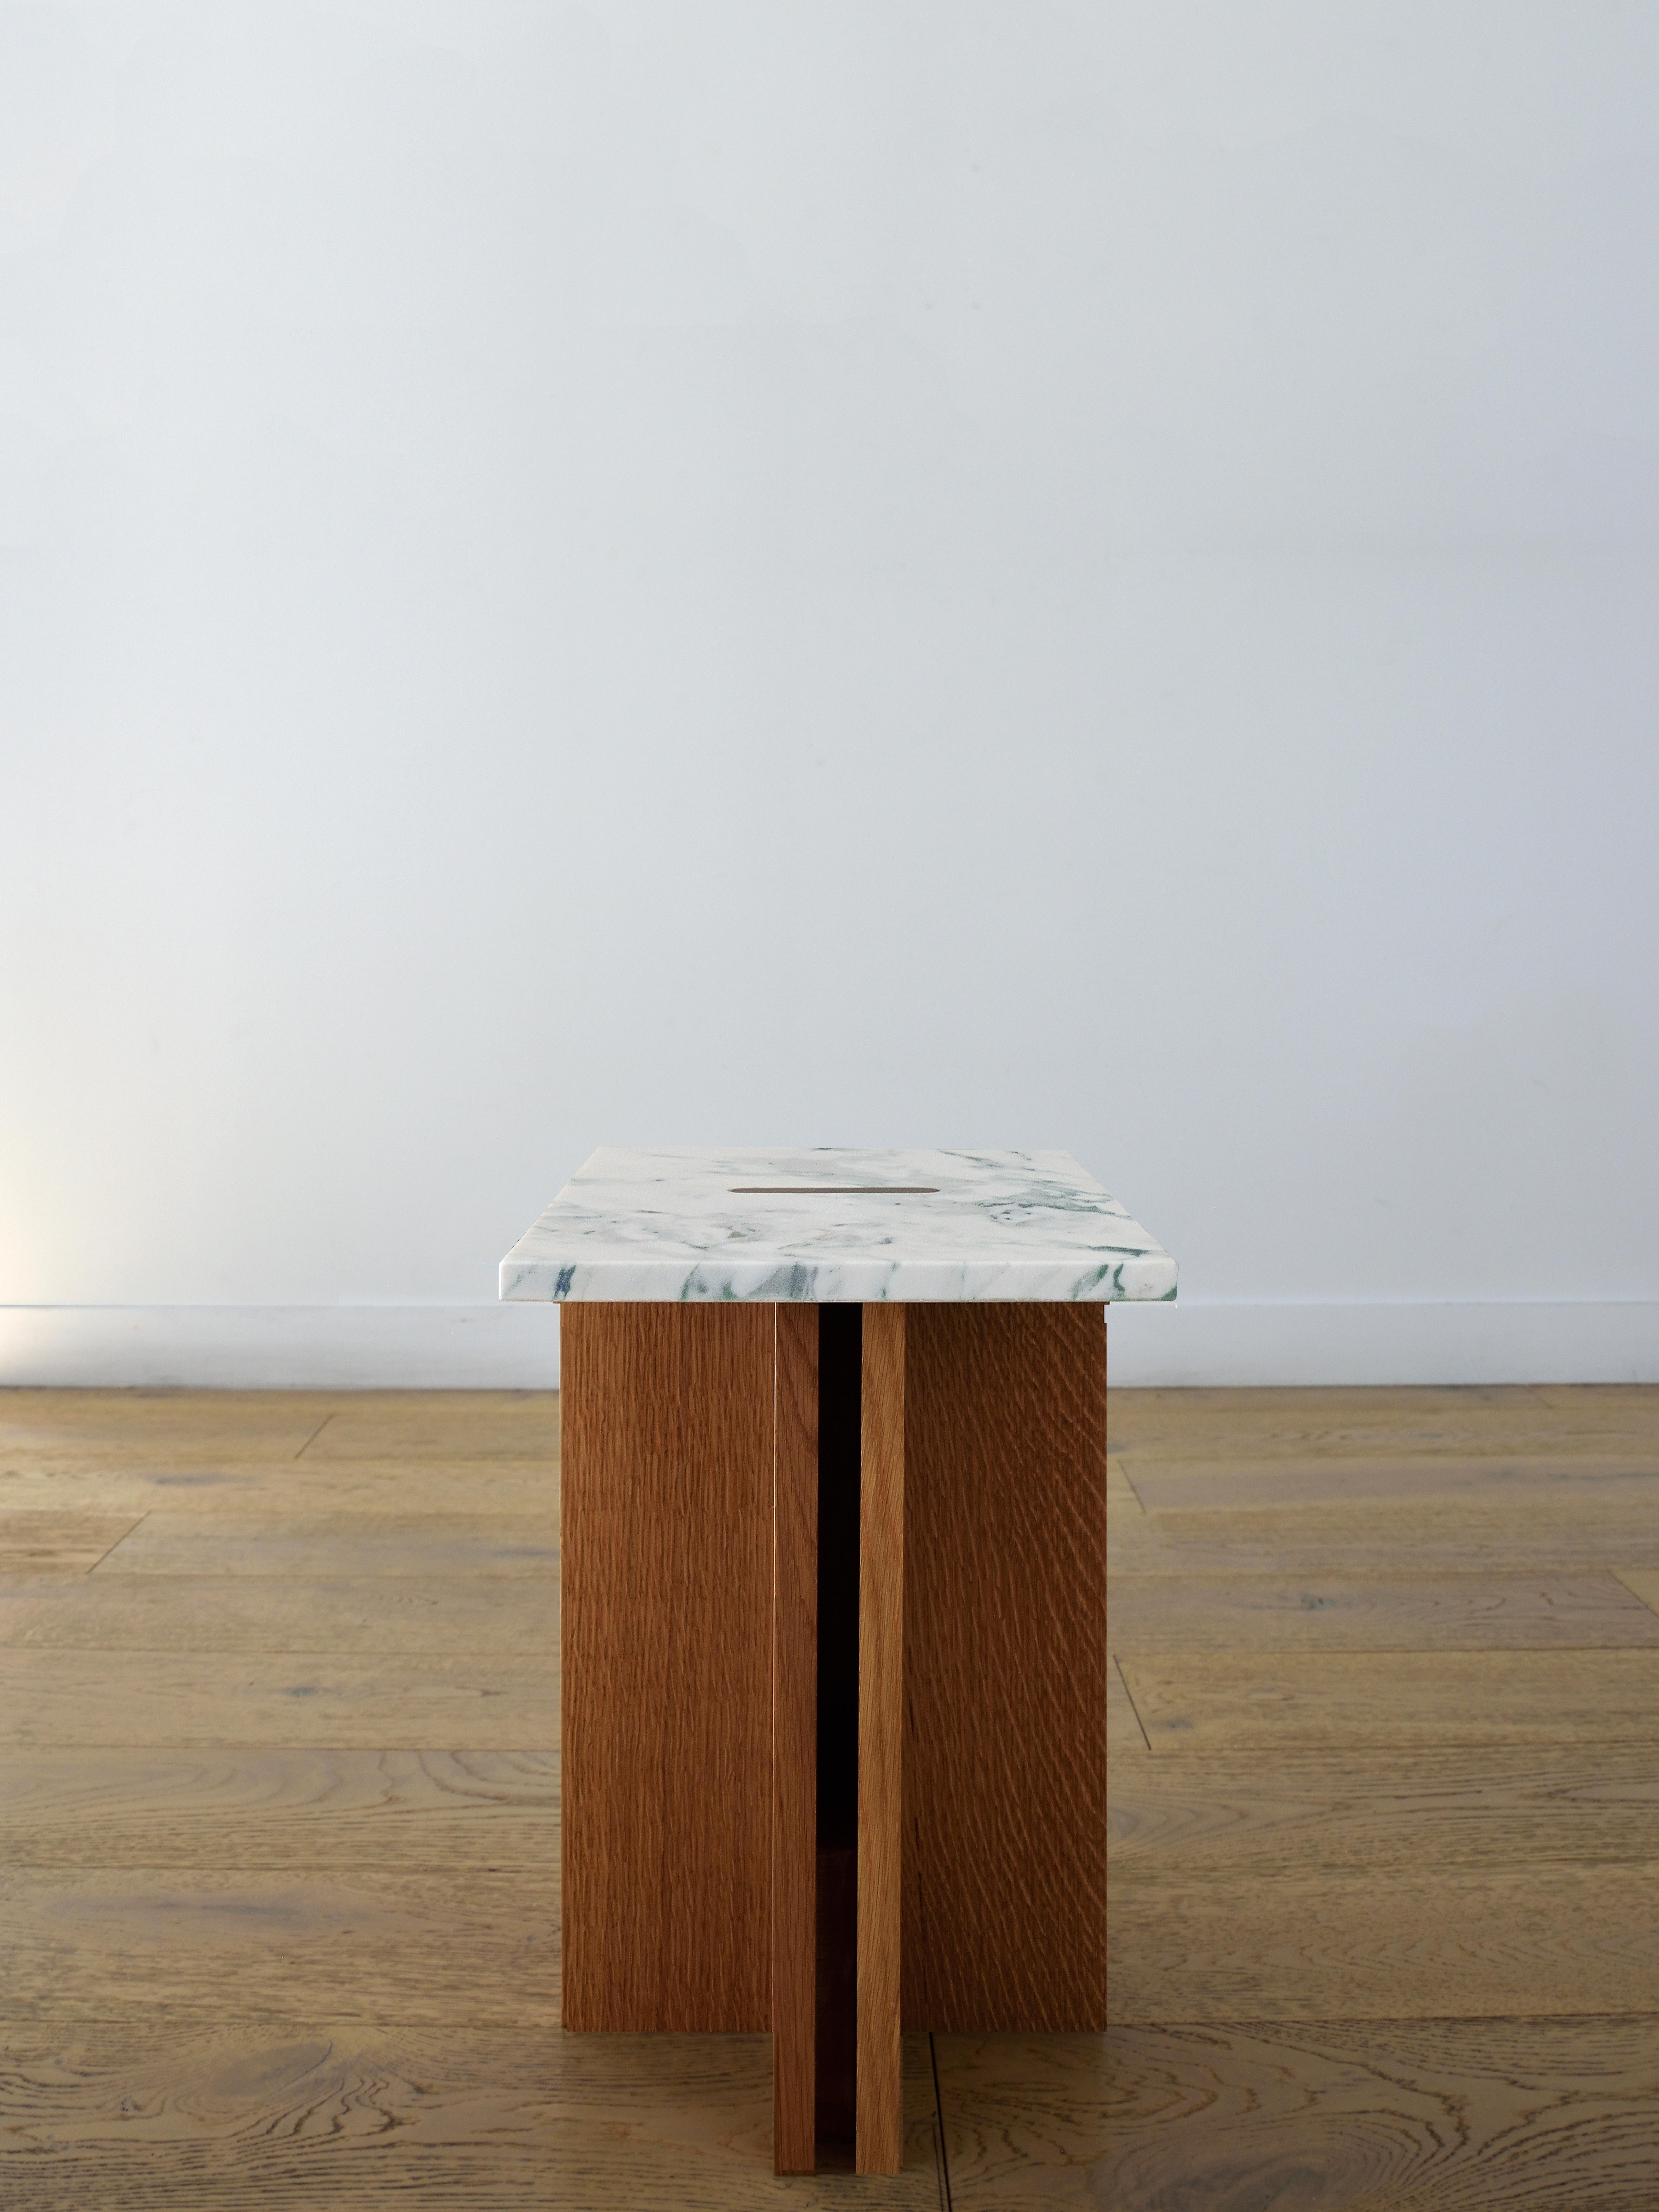 The Interlock end table series are inspired by Hanok, Korea’s traditional houses first designed and built in the 14th century during the Joseon dynasty. Its architectural joinery details of wooden plates interlock and create perfect tension, balance